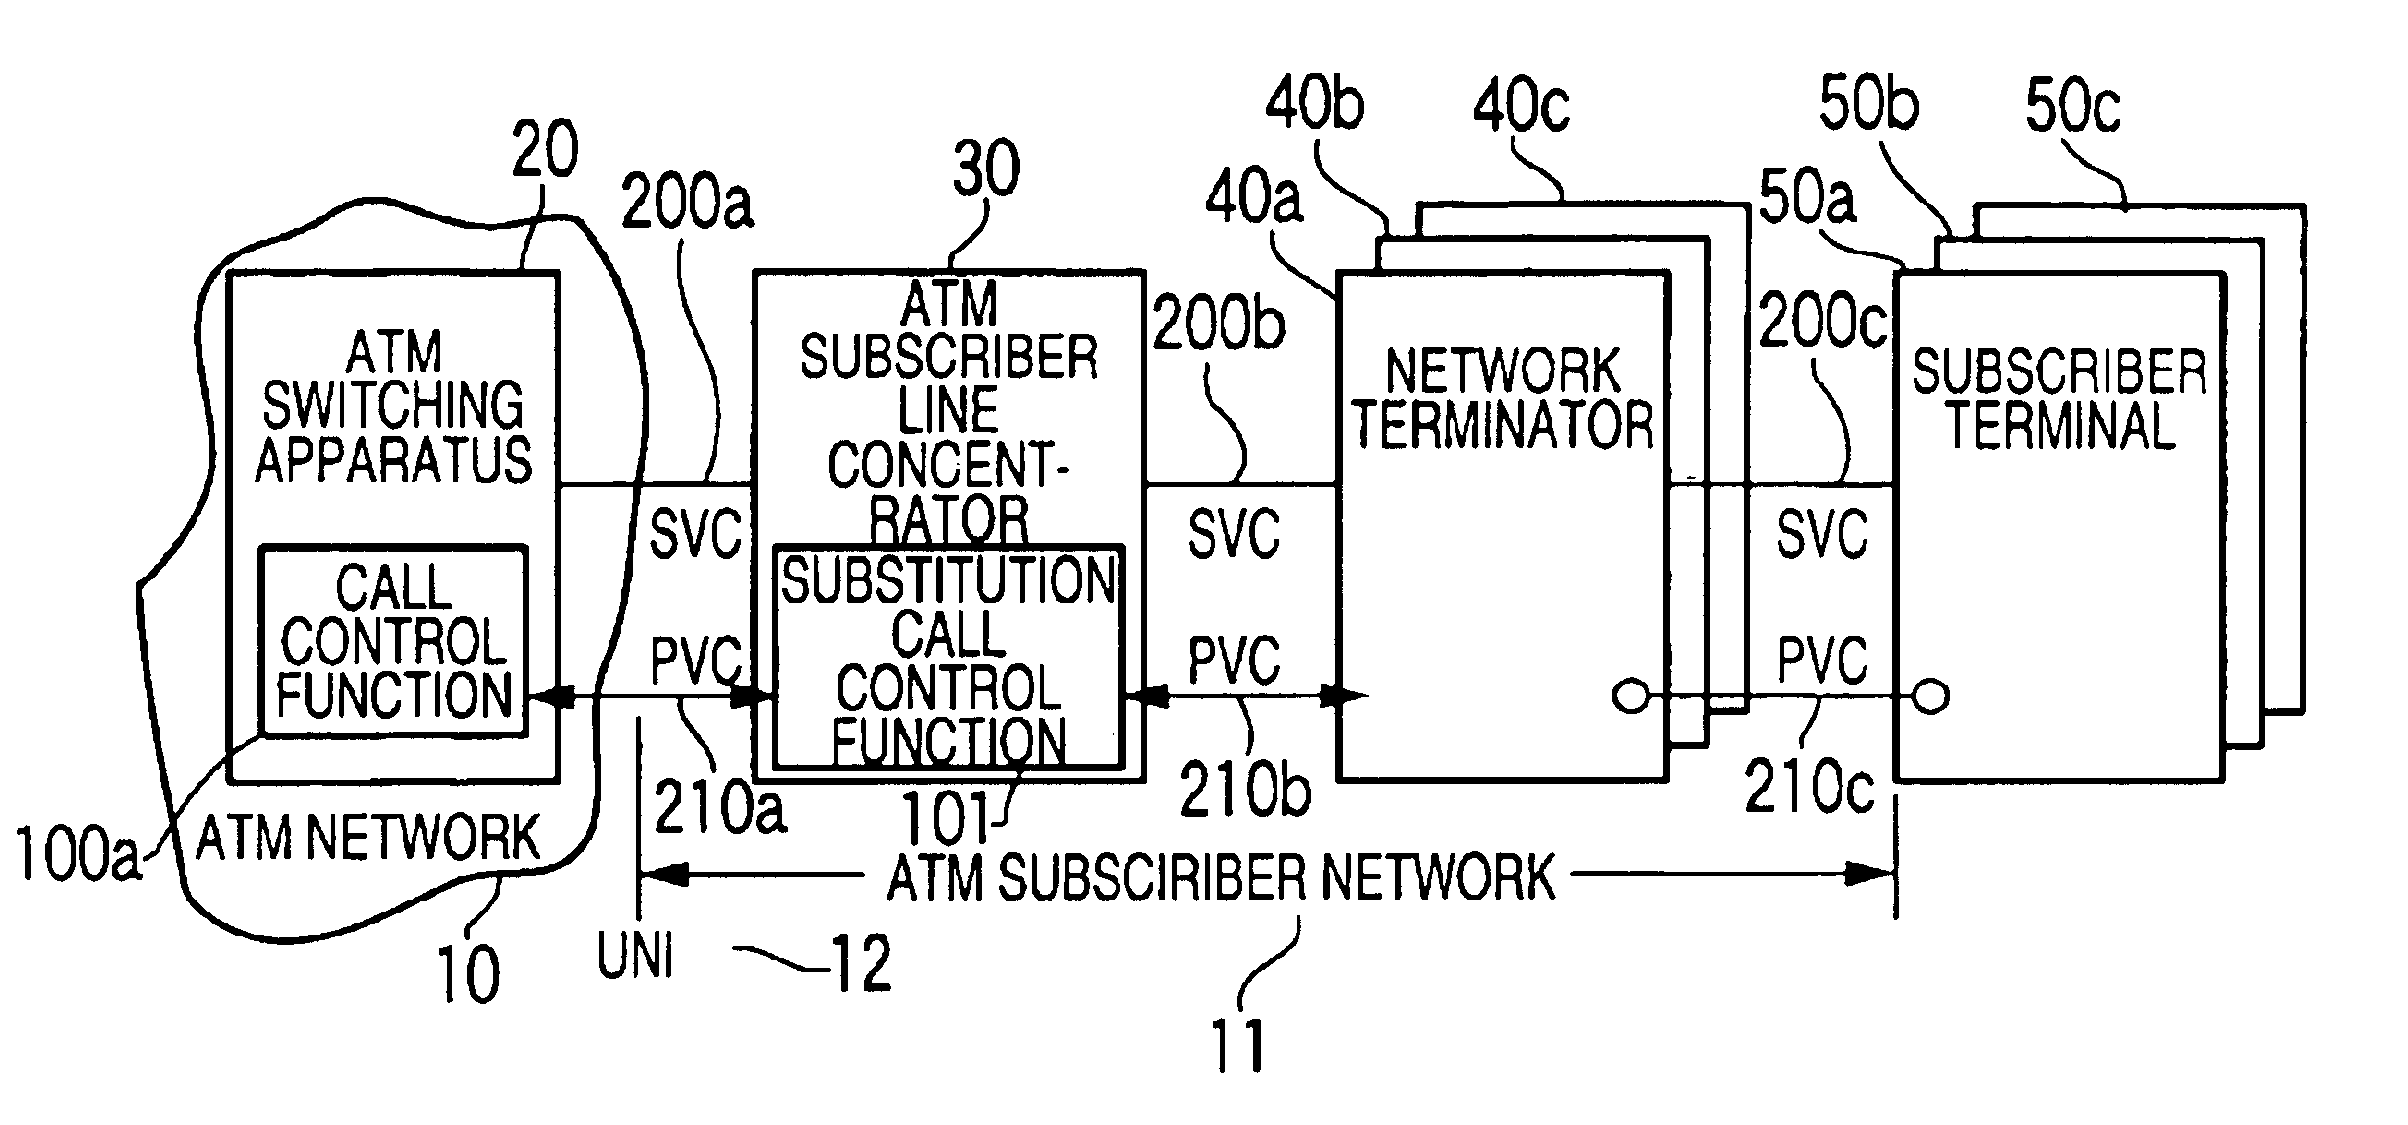 Substitution call control system in ATM communication network